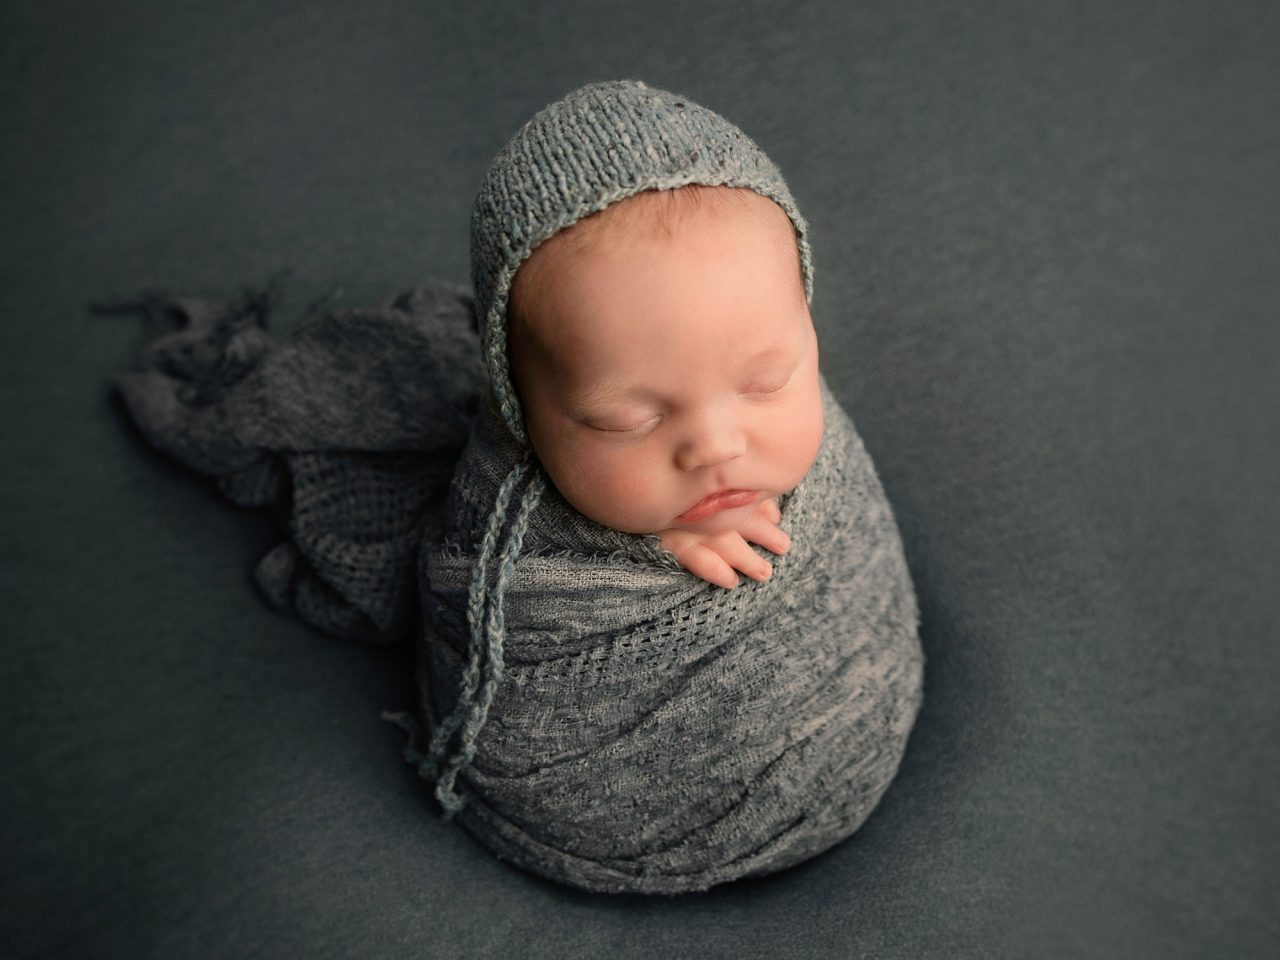 small newborn swaddled in a blue-grey, knitted blanket